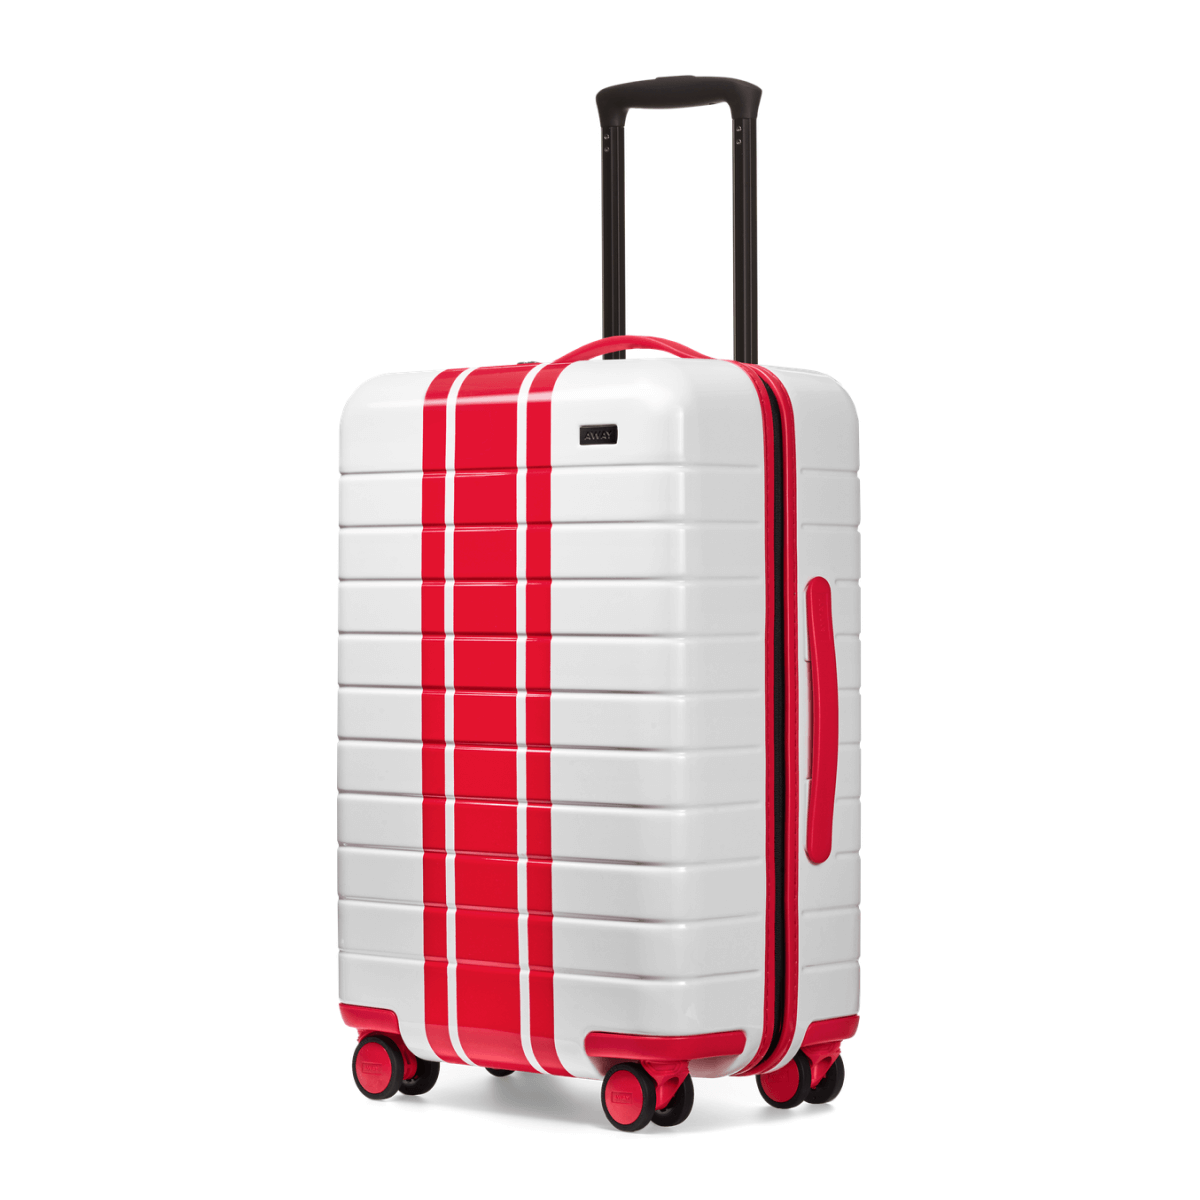 Away red and white suitcase